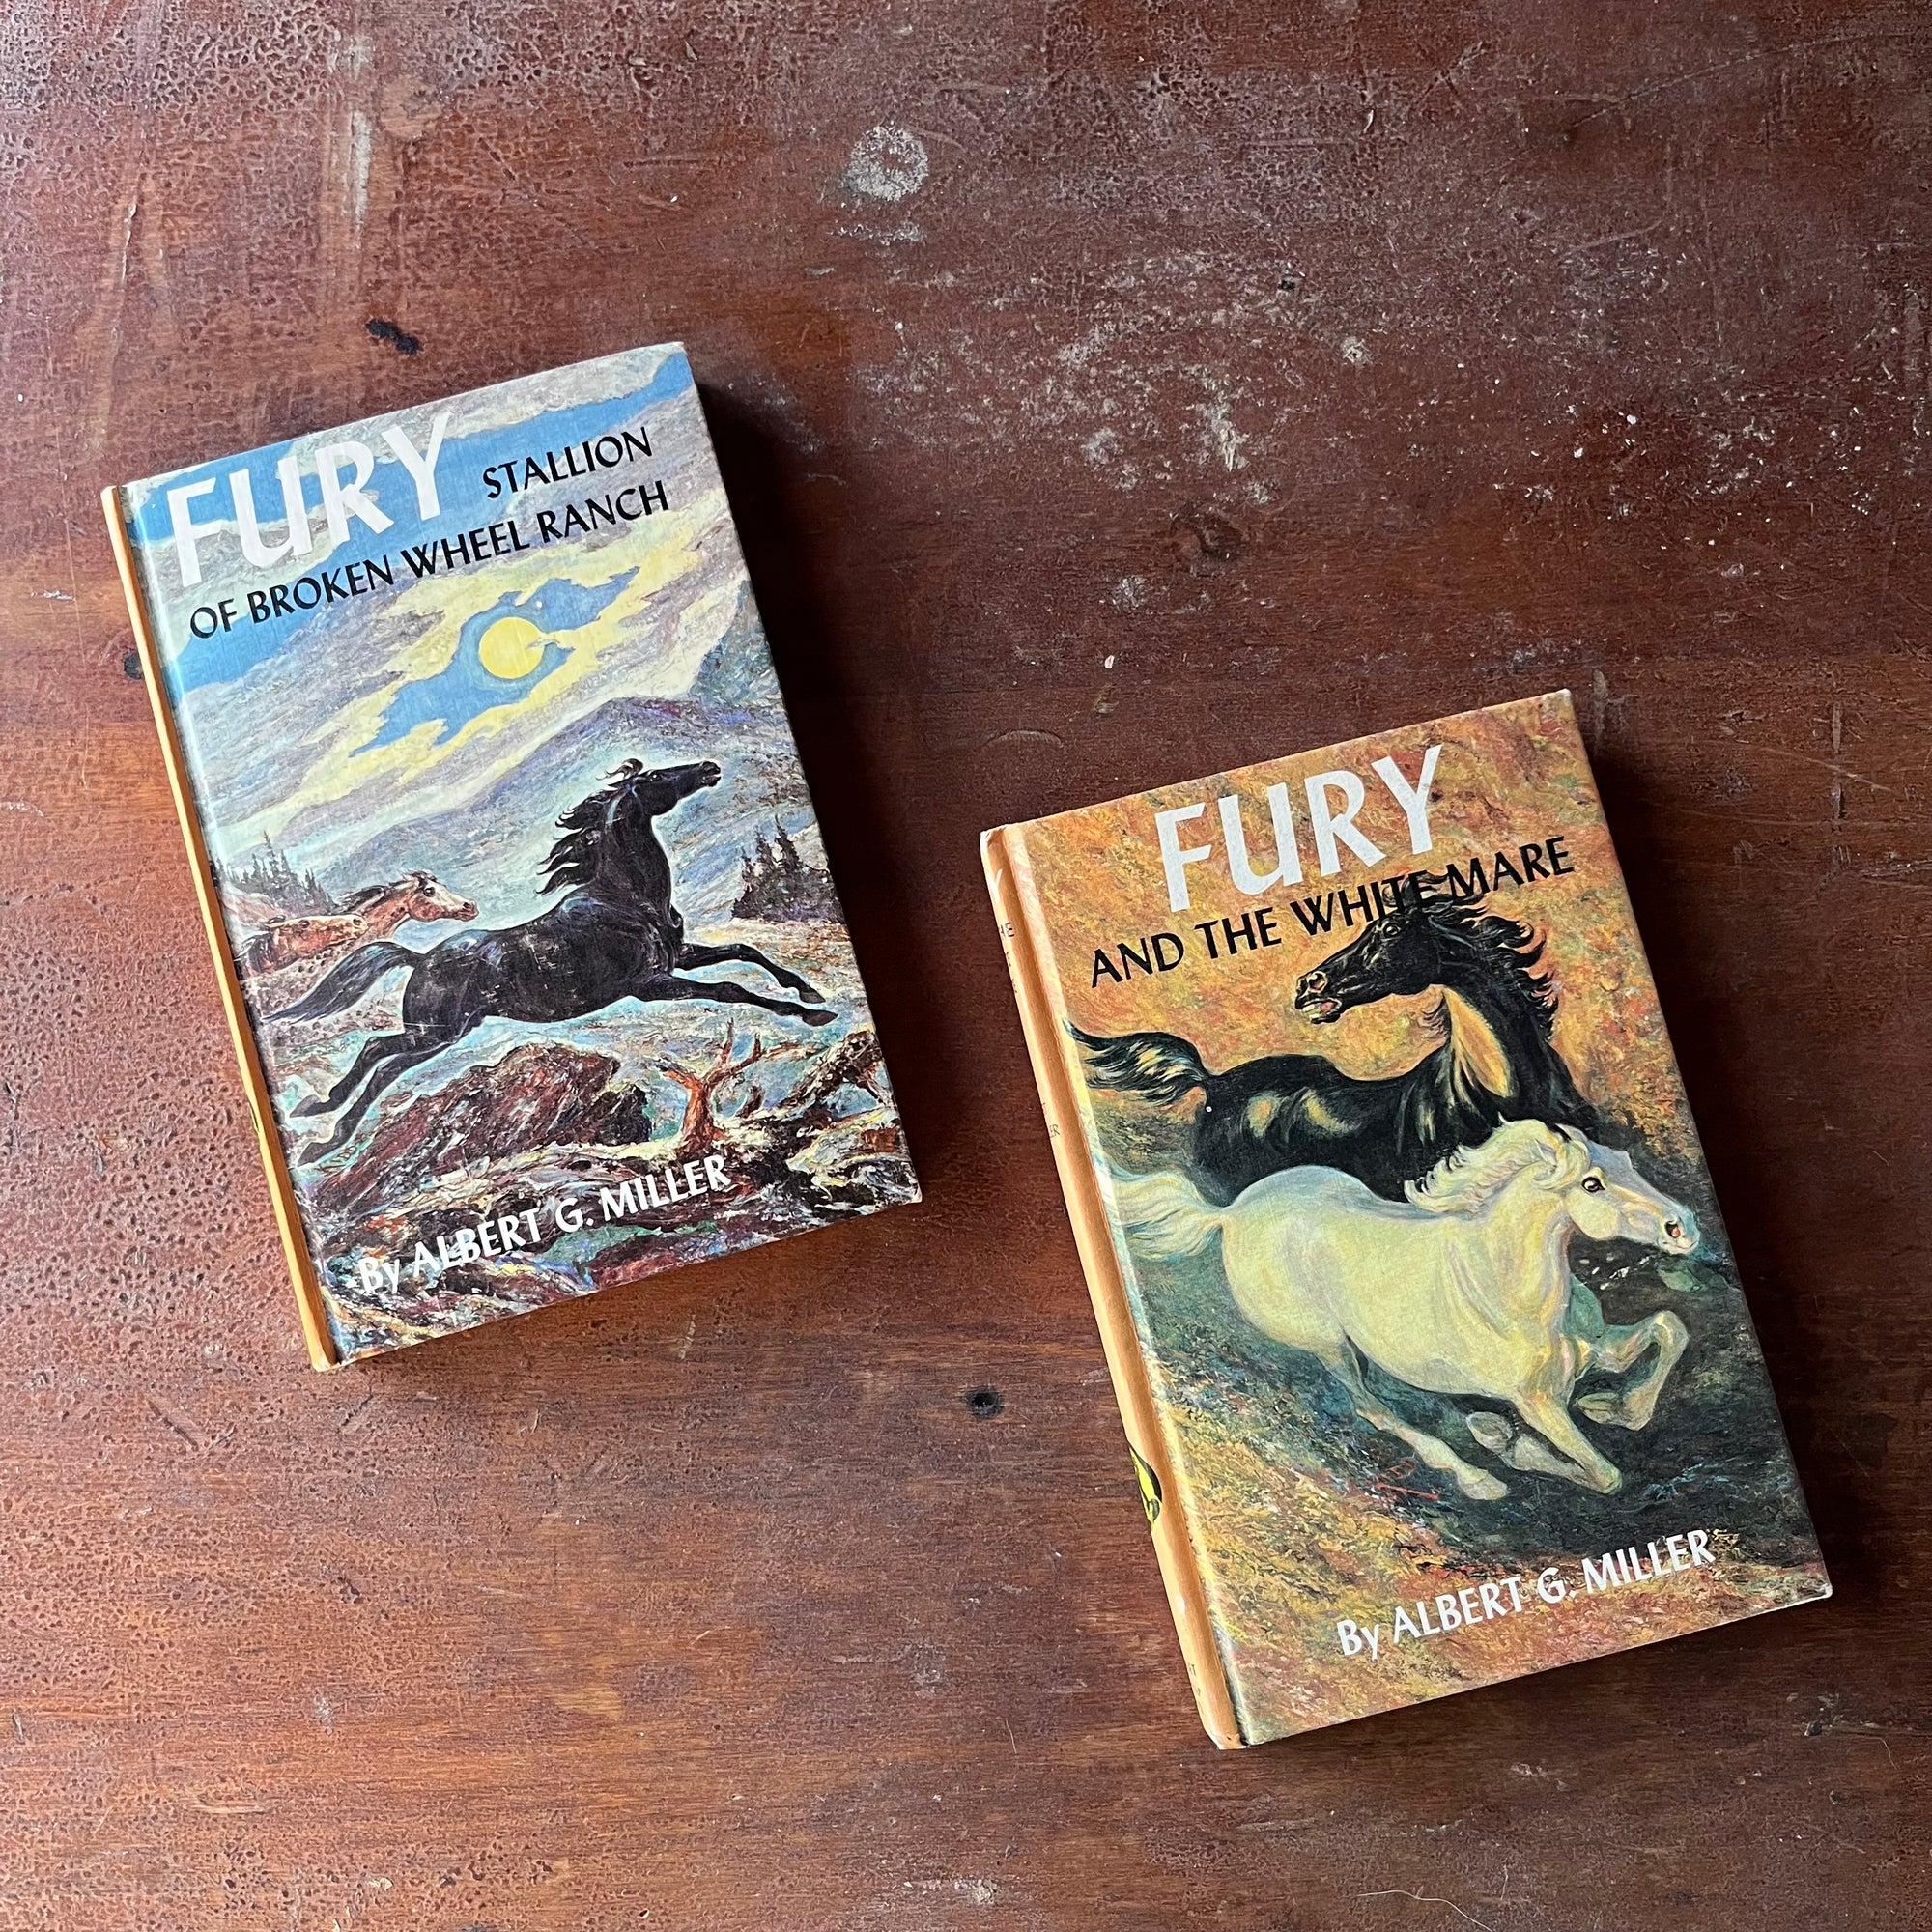 Pair of Fury Stallion Books written by Albert G. Miller - Fury Stallion of Broken Wheel Ranch and Fury and the White Mare - view of the front covers